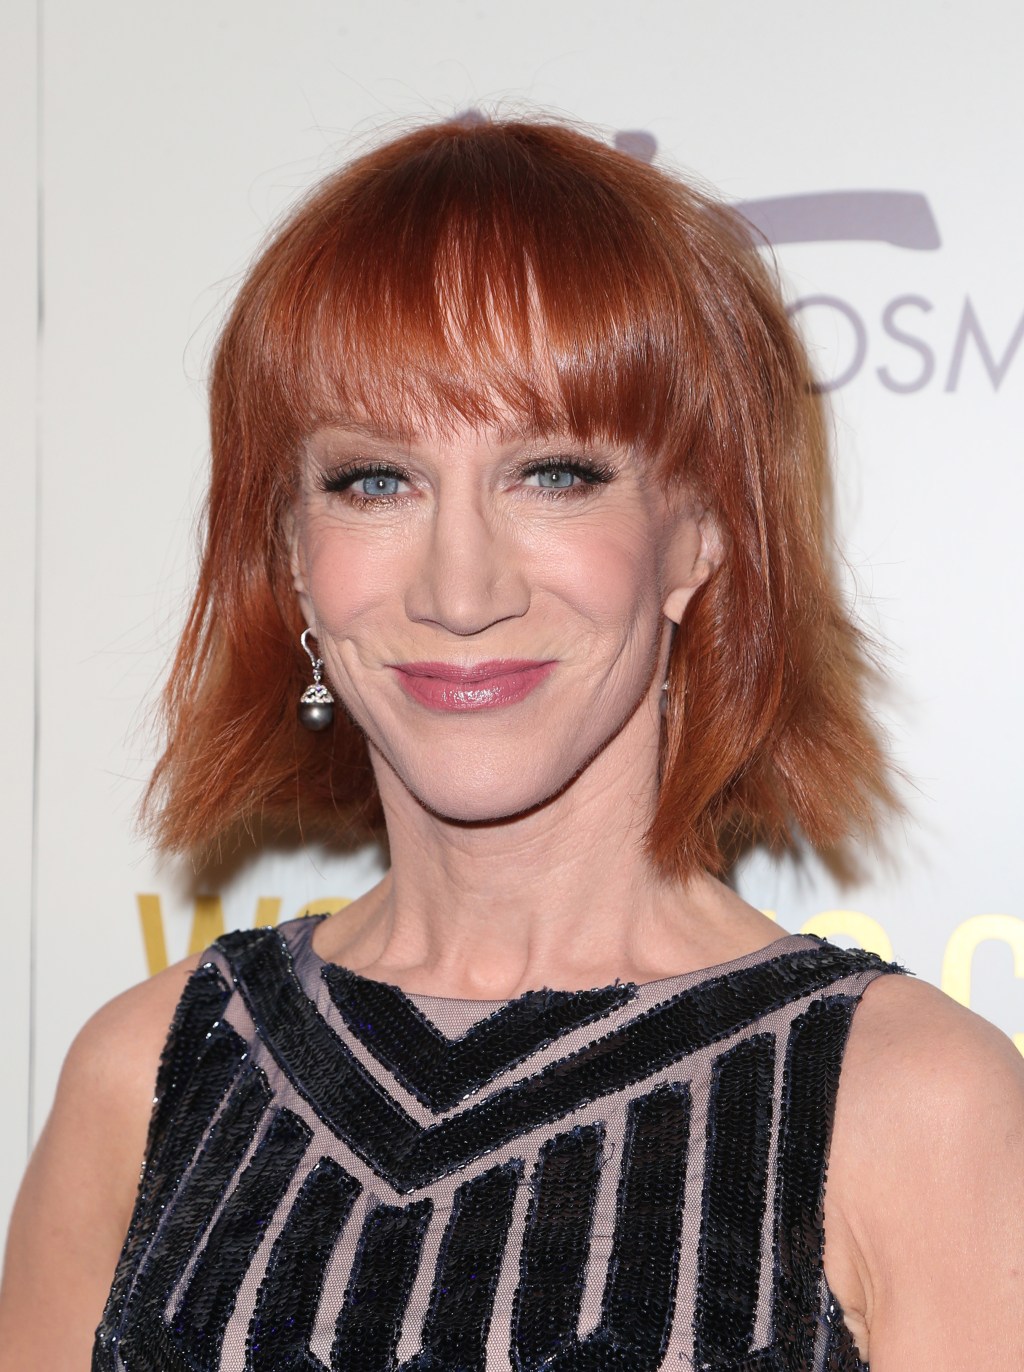 Kathy Griffin may have gone too far with Trump head joke